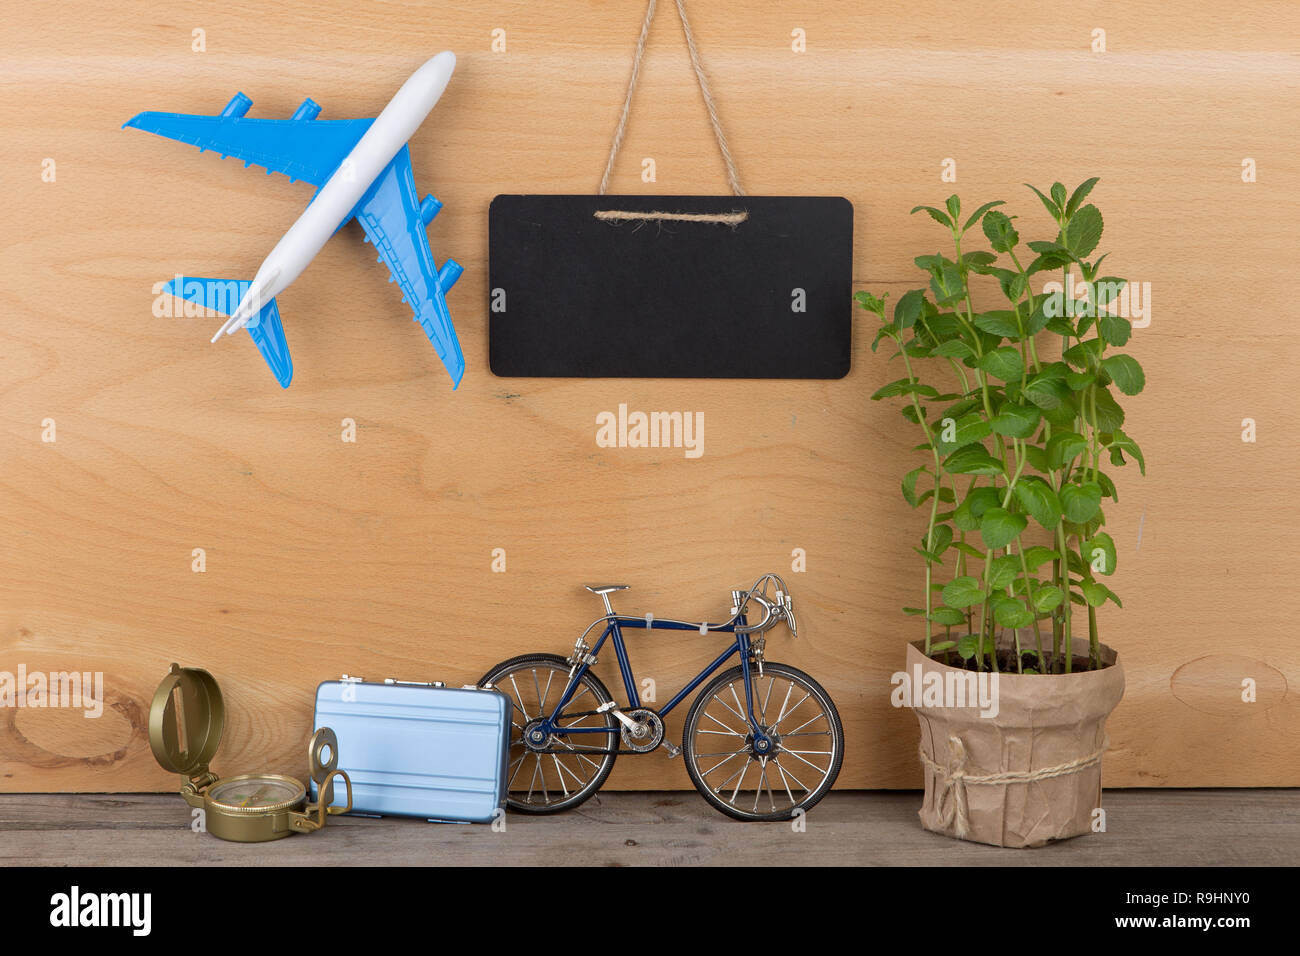 Travel time concept - blank blackboard, airplane model, little bicycle and suitcase, compass on wooden background Stock Photo